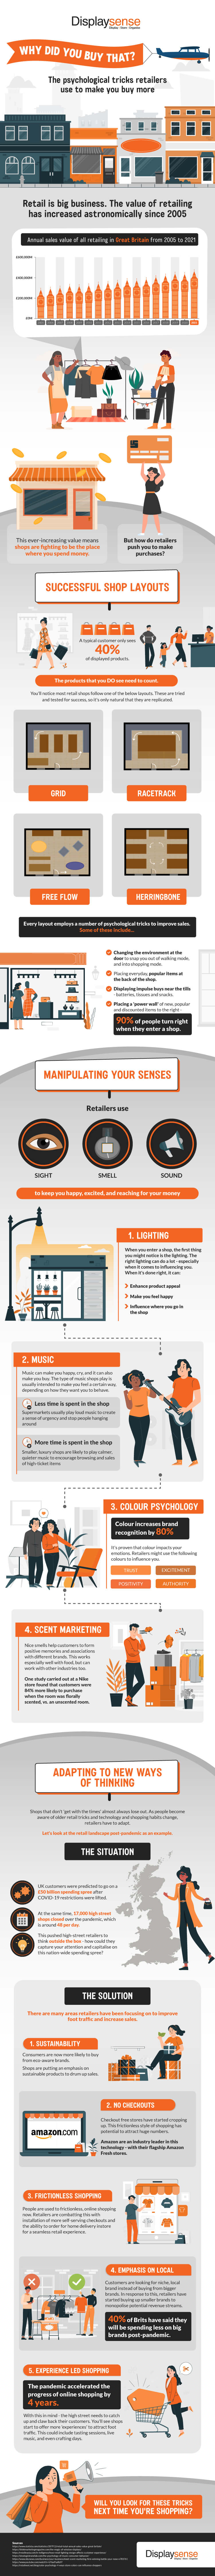 retail psychology infographic